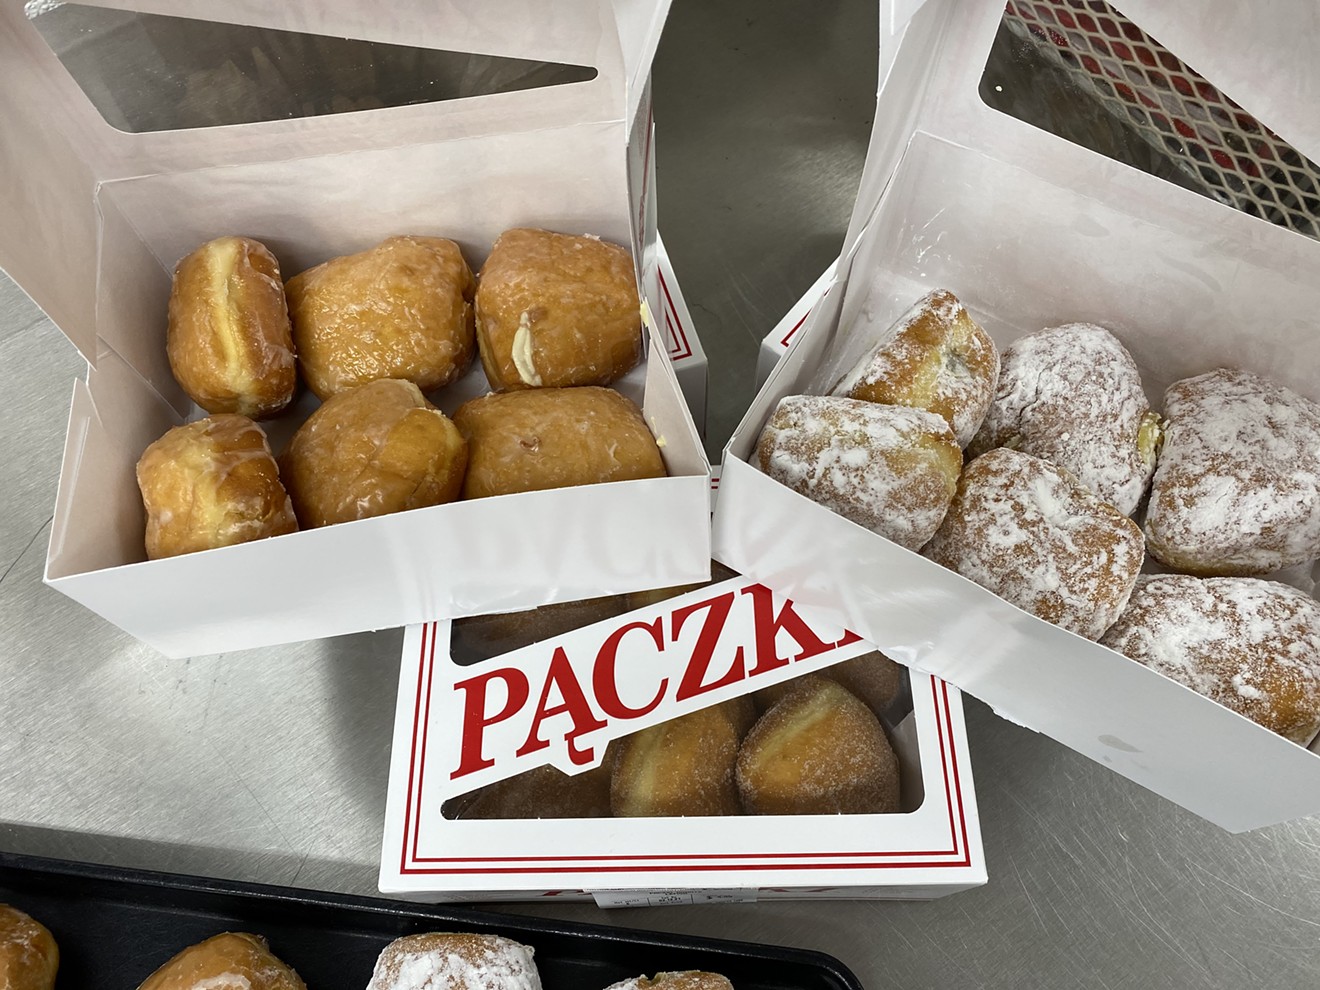 Bashas' sells paczki individually or in boxes of six.